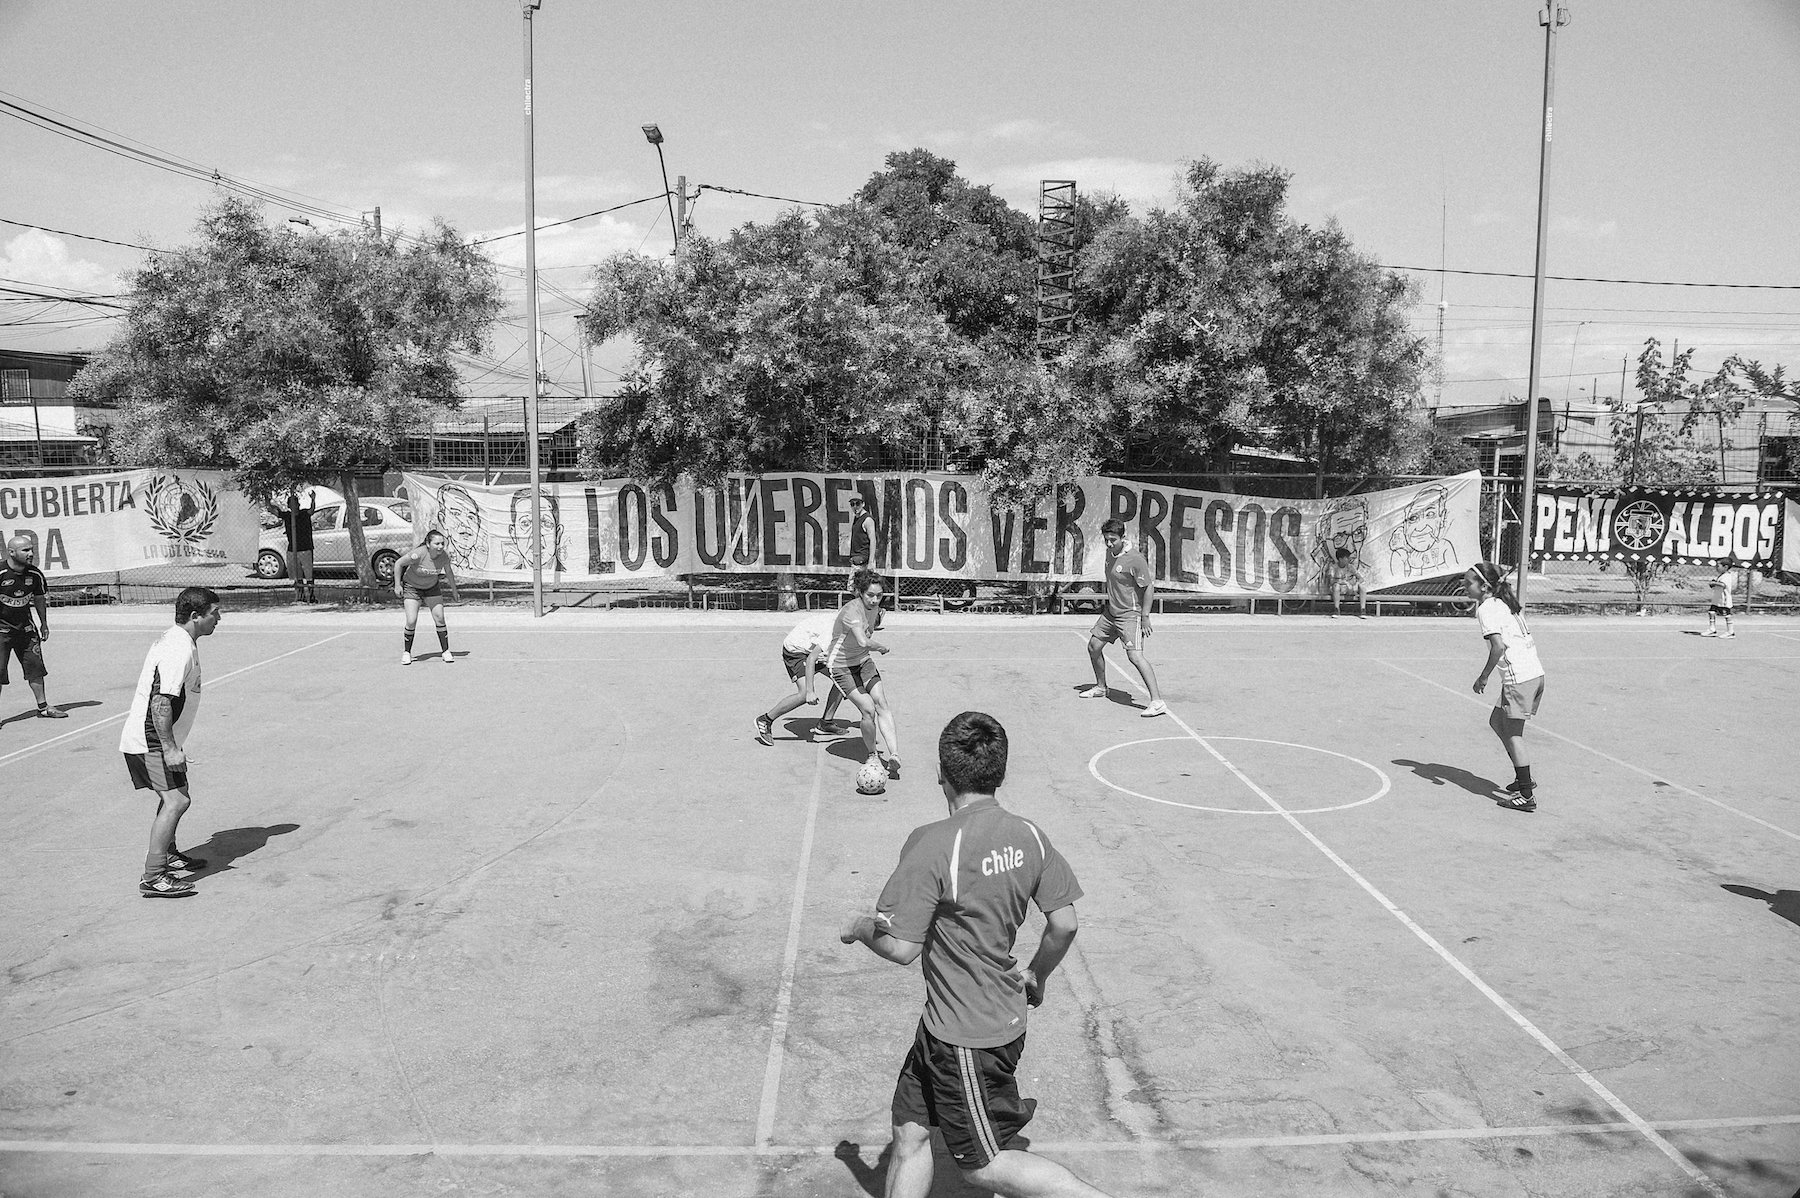  A game of pick-up fútbol during an event honoring political prisoners in La Victoria, Chile, a settlement in Santiago with a rooted history in organized urban land occupations. La Victoria is one of the first organized urban occupations of land in a